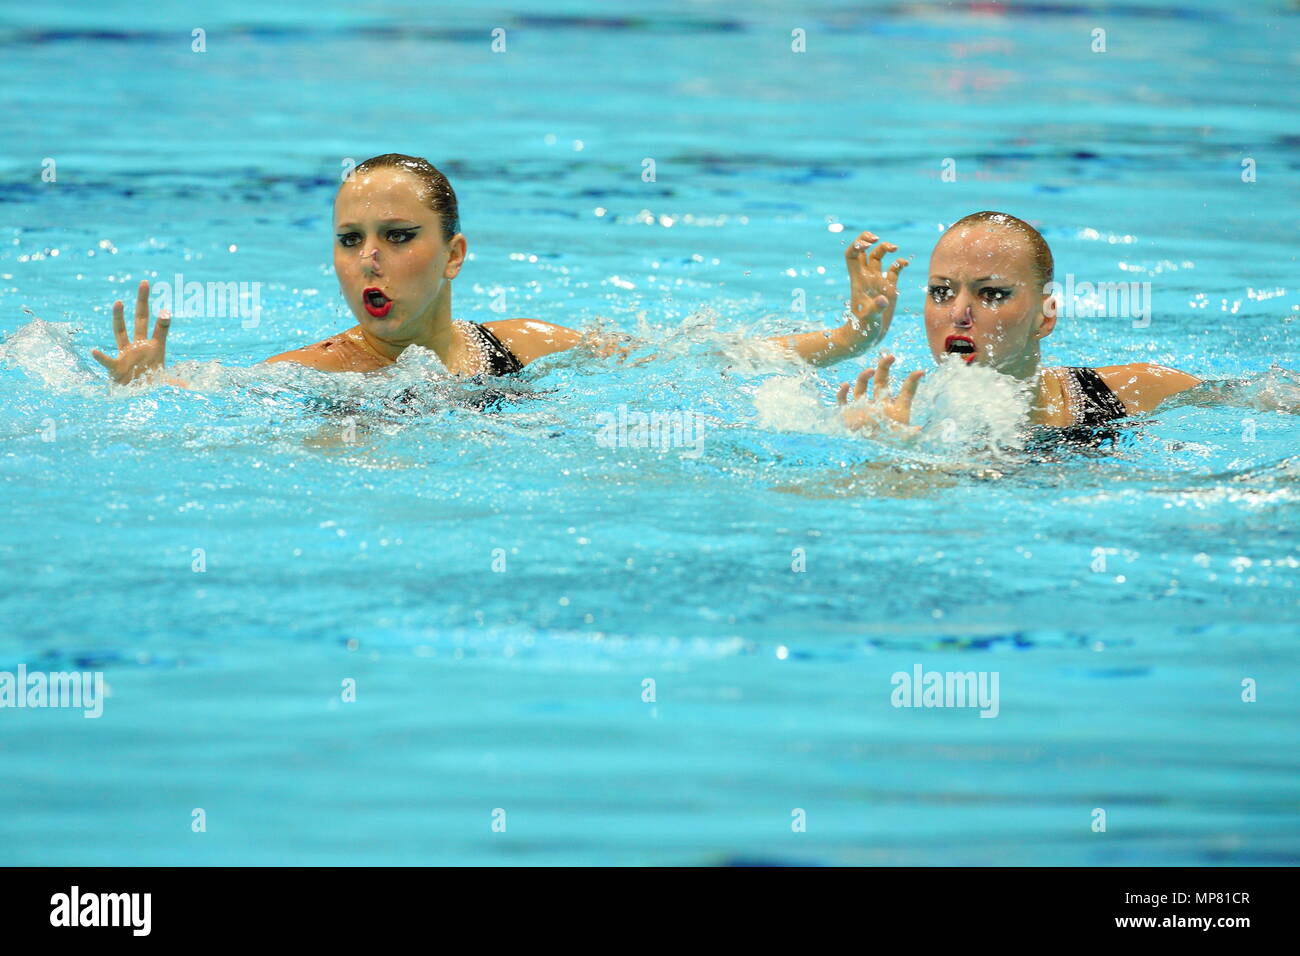 The Duets Team from Austria BRANDL Nadine and LANG Livia during the Free Routine of the Fina Synchronised Swimming event at the Aquatic Centre London Olympic Park 22 April 2012 --- Image by © Paul Cunningham Stock Photo